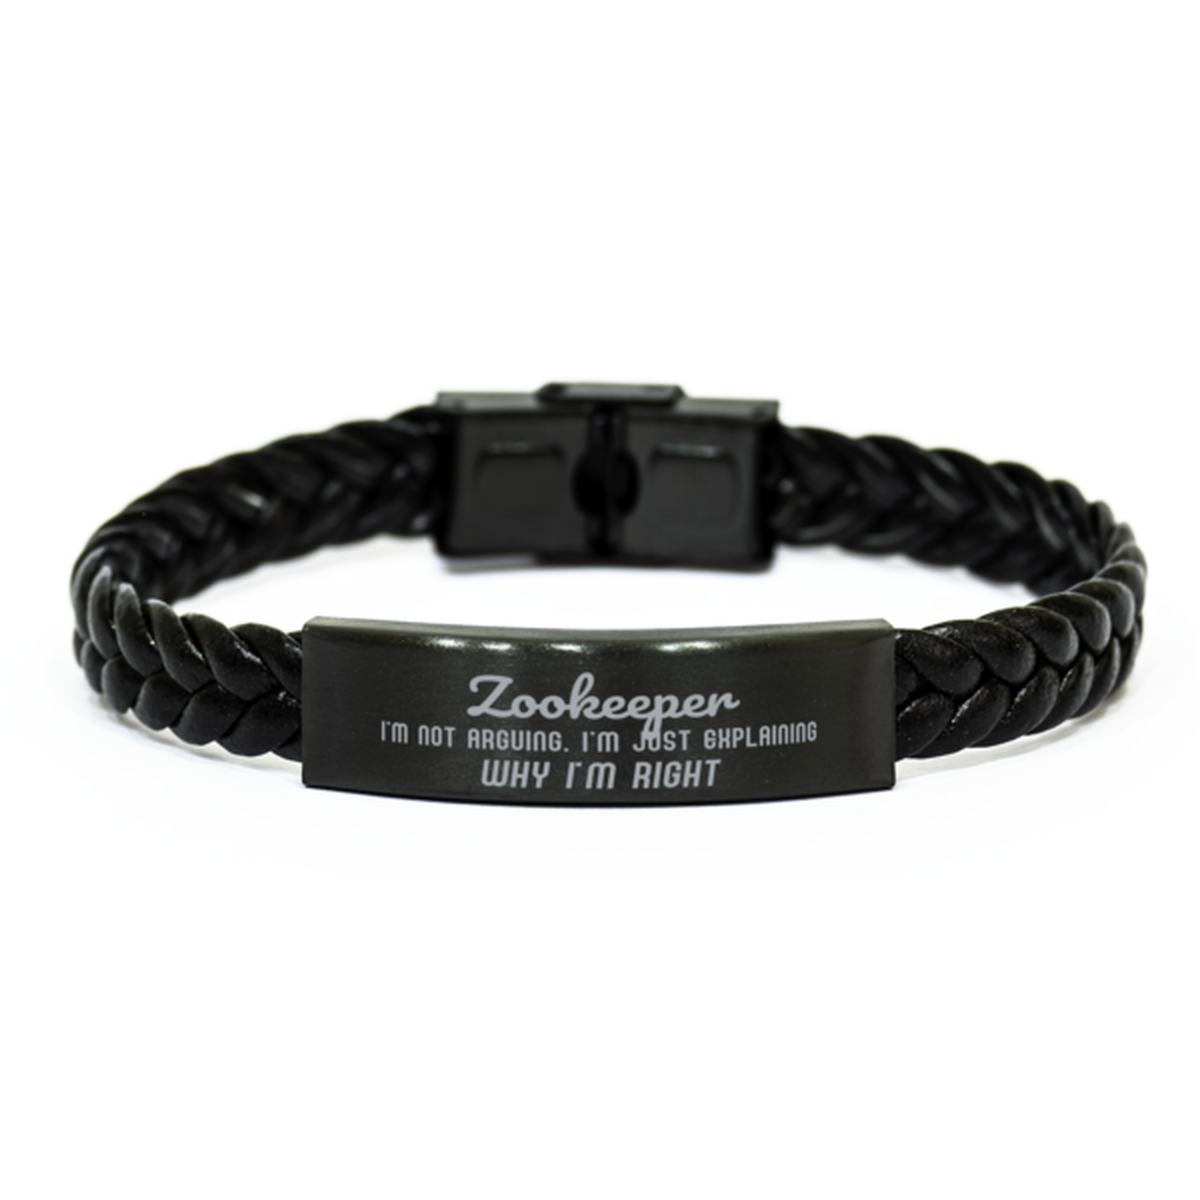 Zookeeper I'm not Arguing. I'm Just Explaining Why I'm RIGHT Braided Leather Bracelet, Graduation Birthday Christmas Zookeeper Gifts For Zookeeper Funny Saying Quote Present for Men Women Coworker